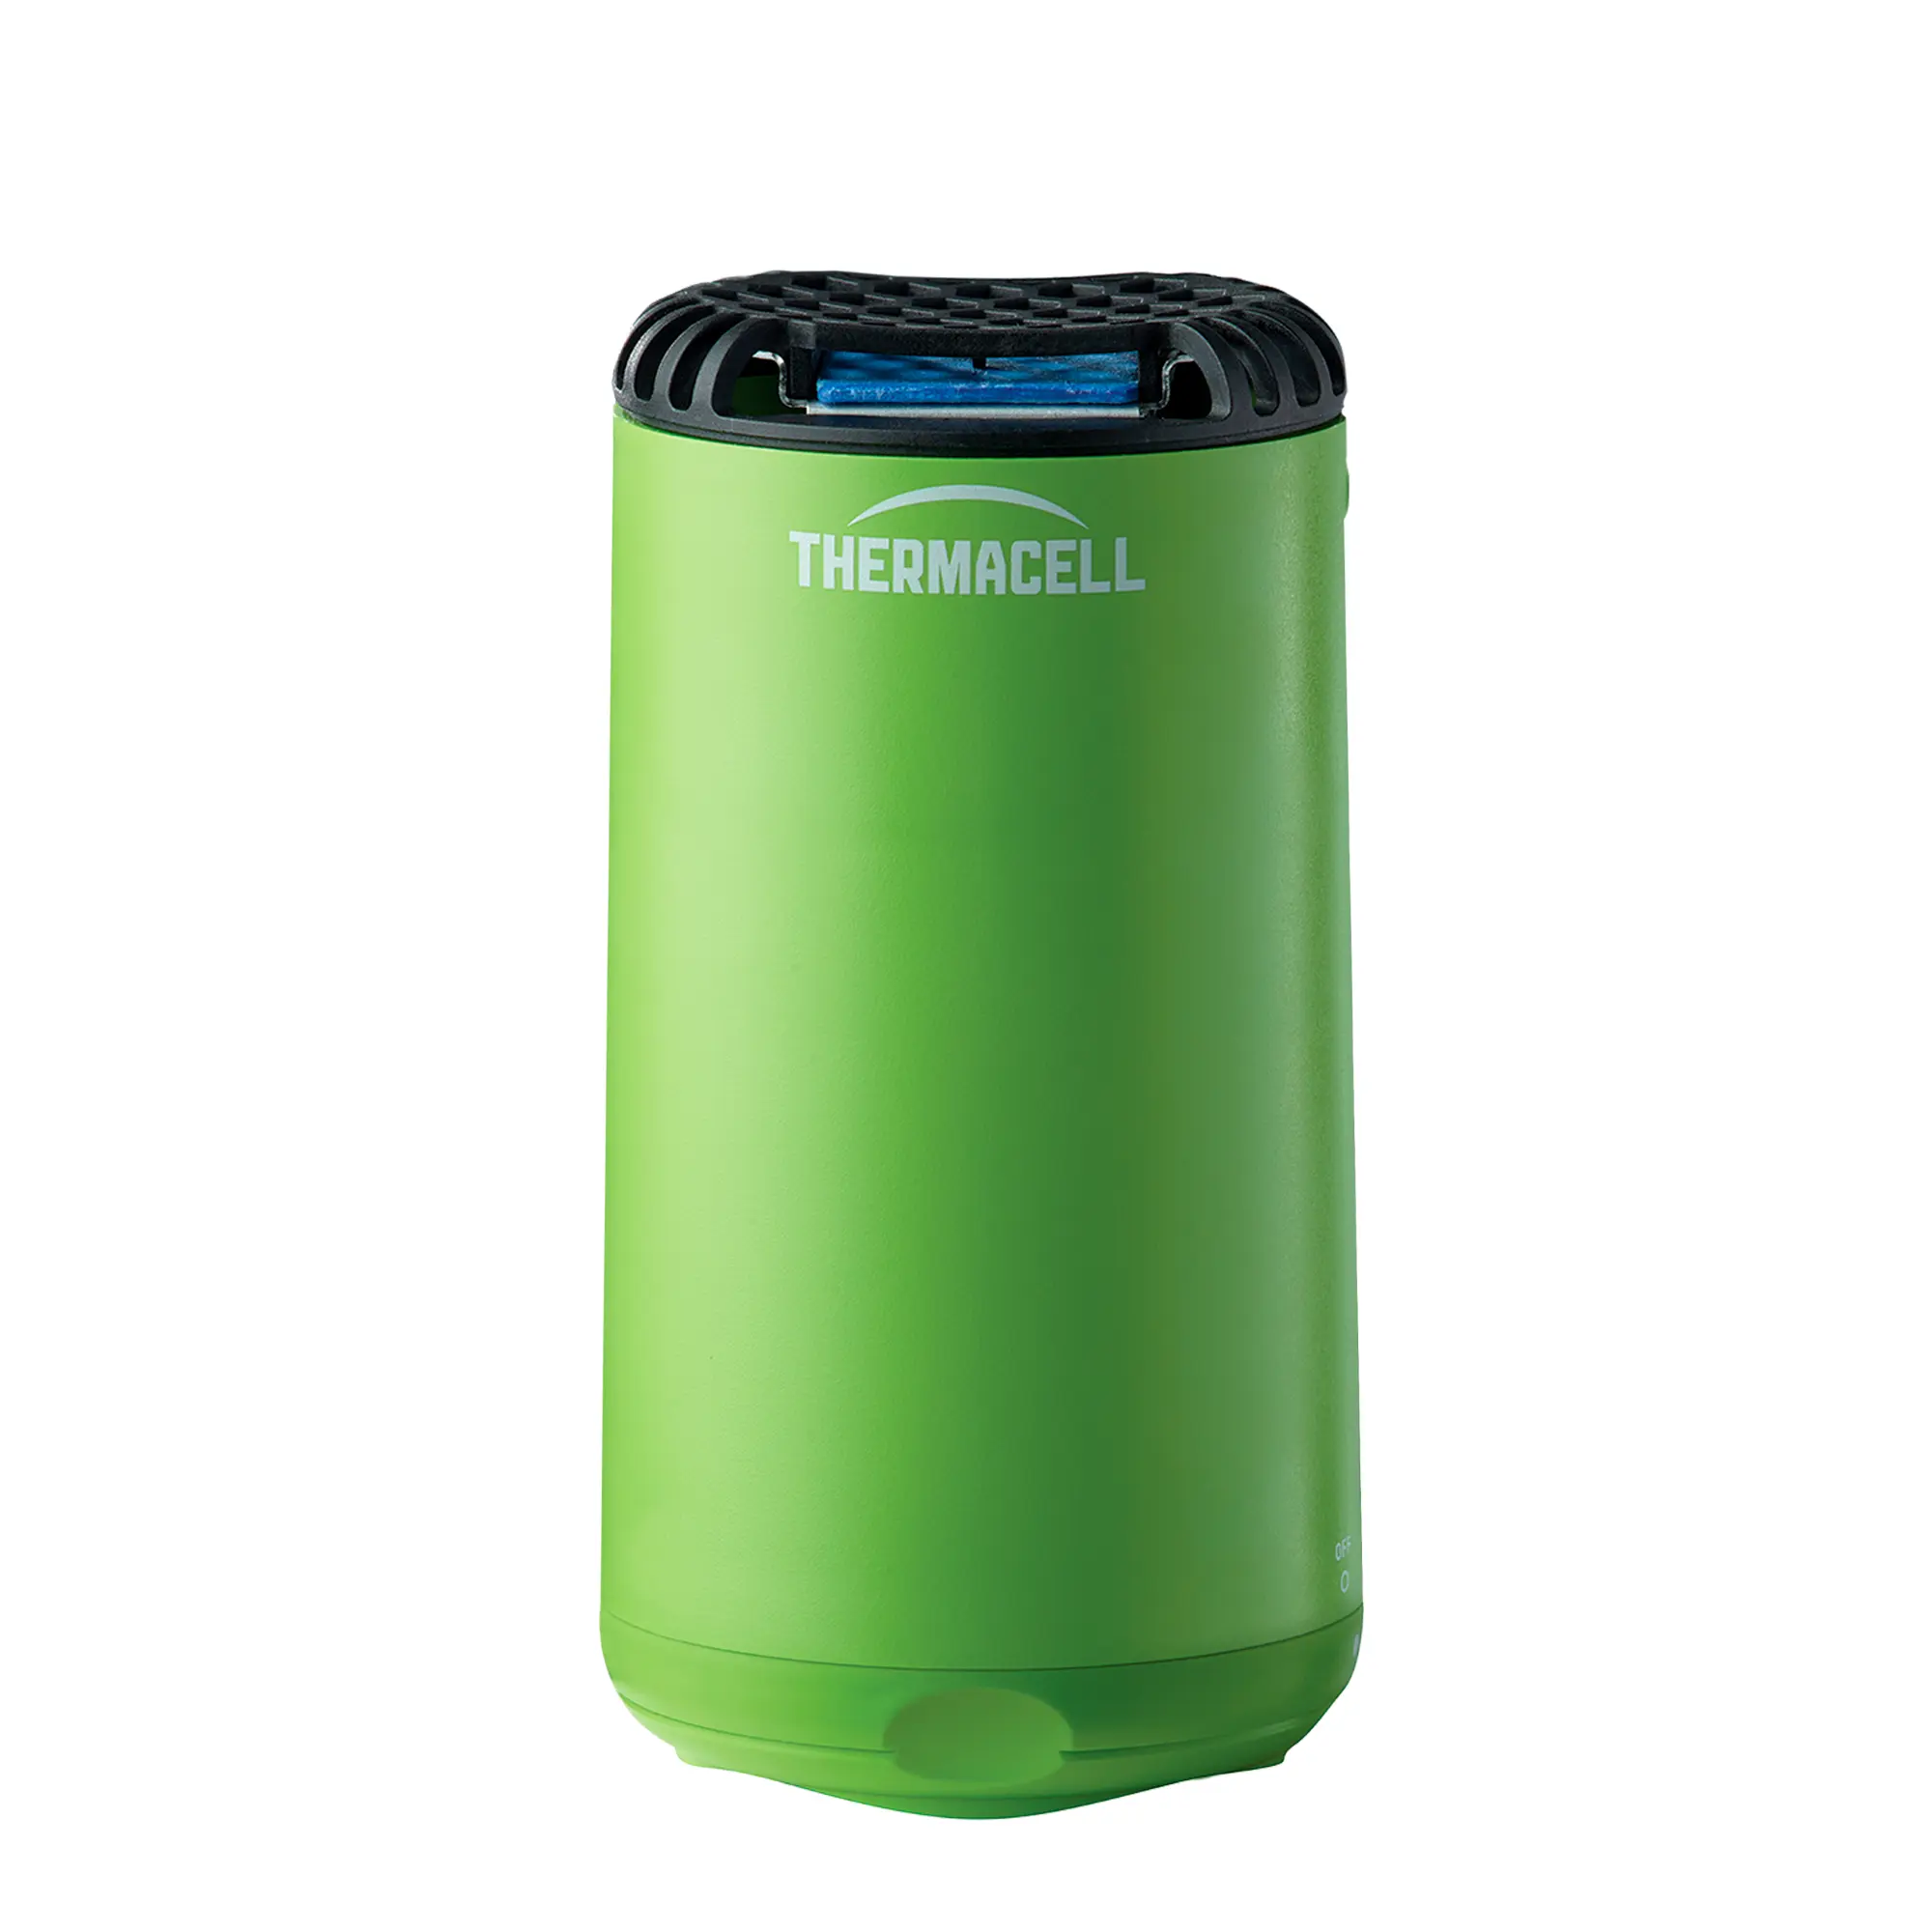 Ahuyentador difusor verde thermacell exterior